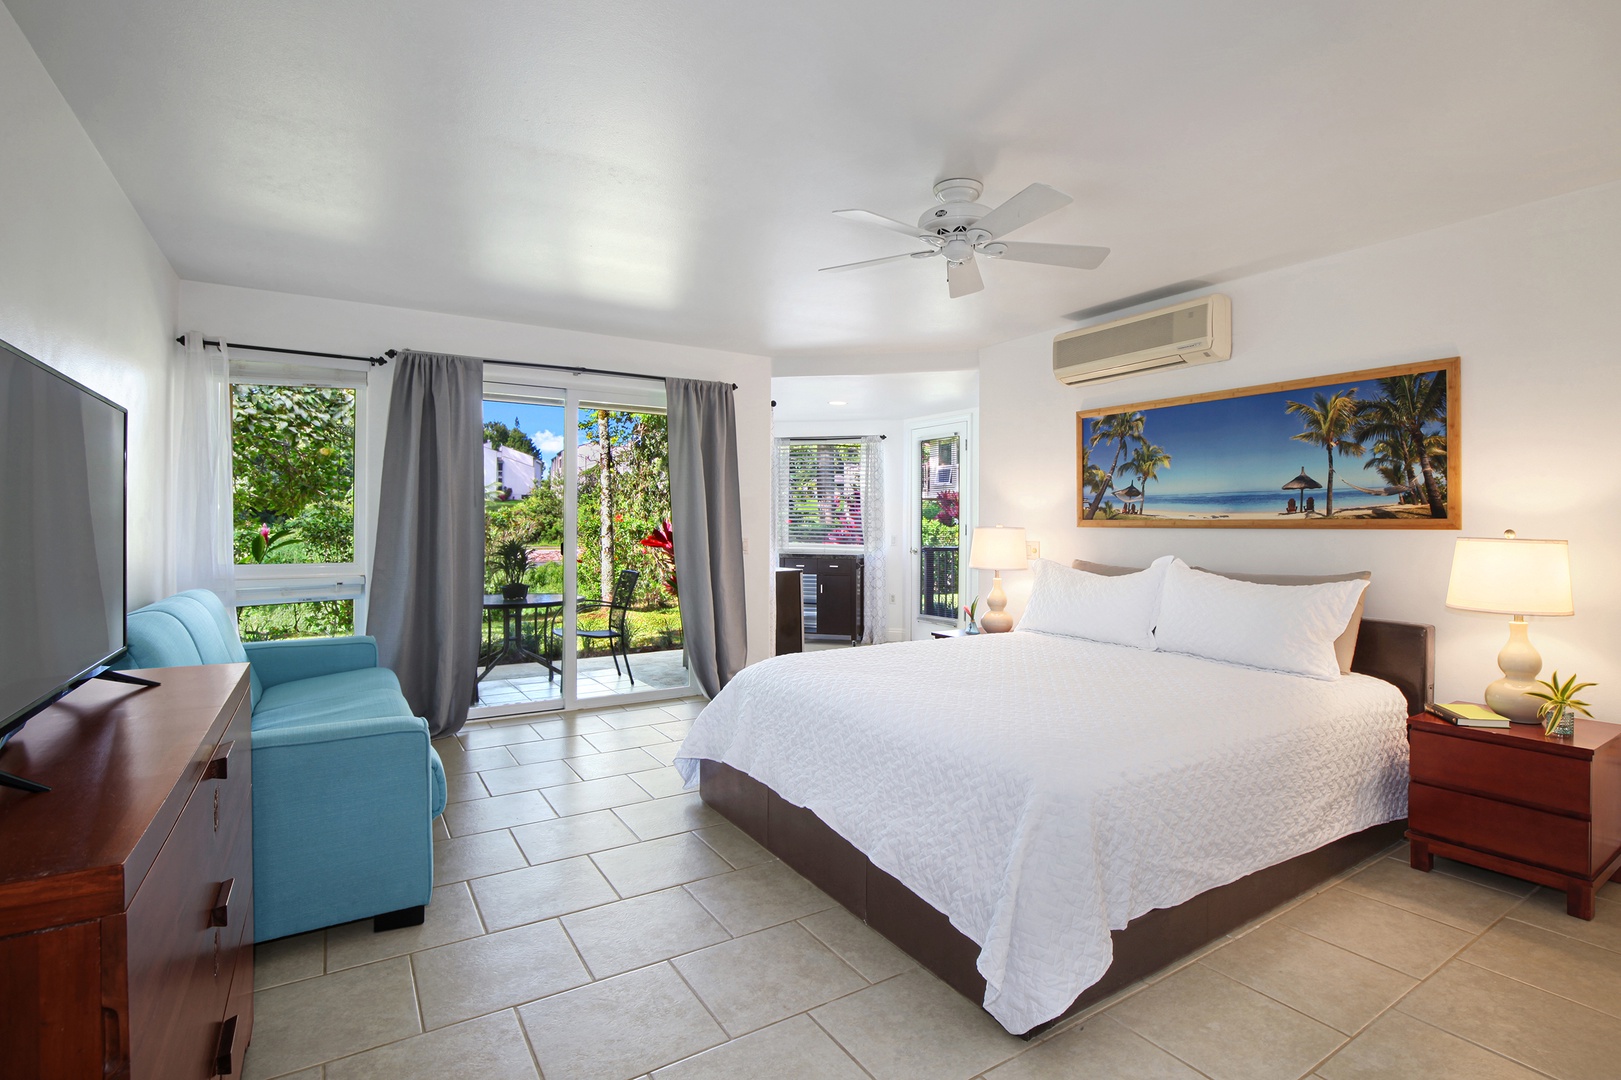 Princeville Vacation Rentals, Villas of Kamalii #35 - An upstairs primary suite features a queen bed and has a private lanai